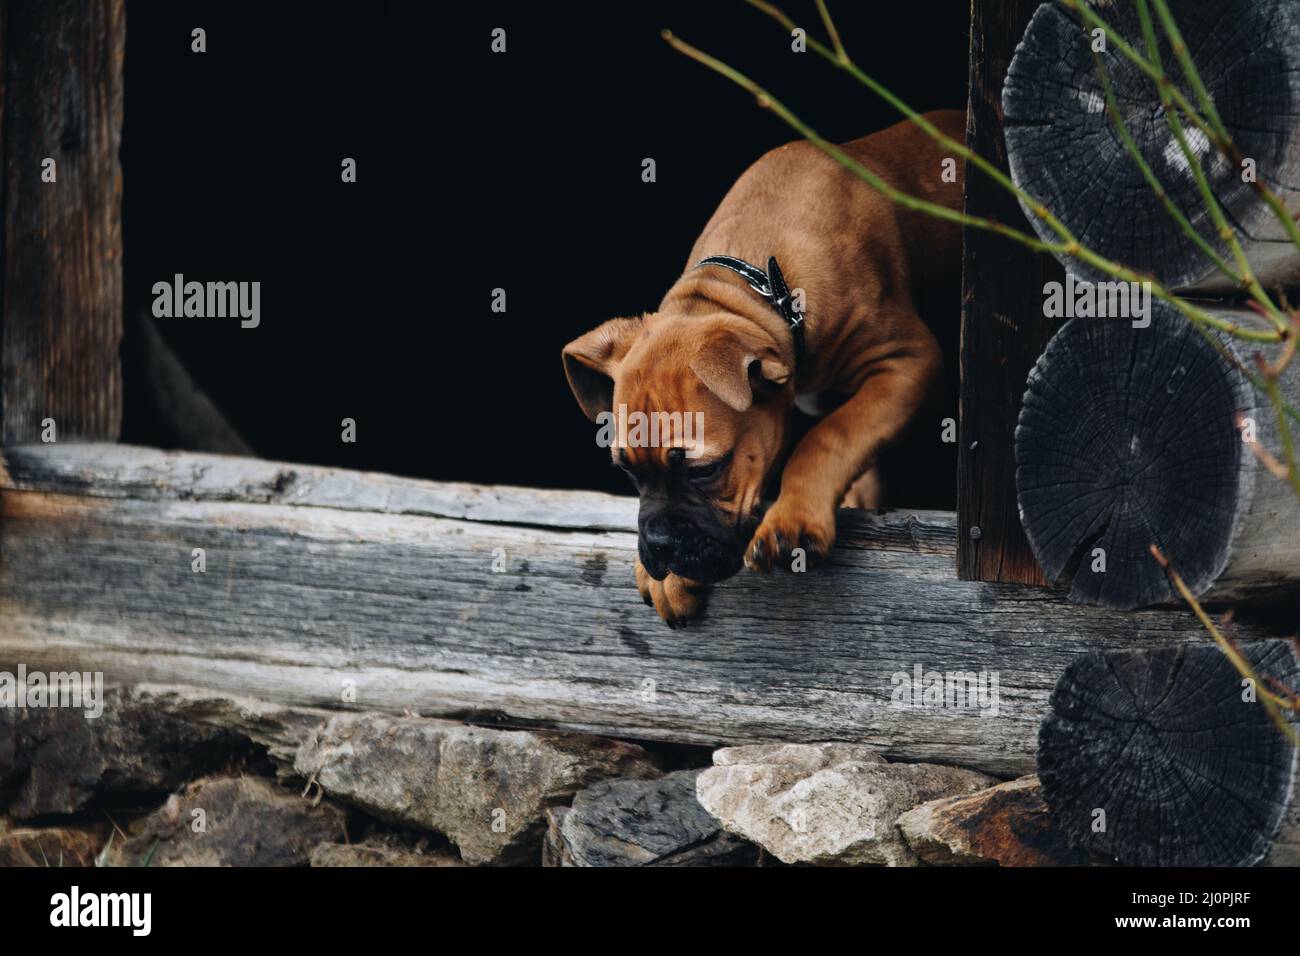 Closeup of the boxer puppy standing on the wooden doorstep. Stock Photo